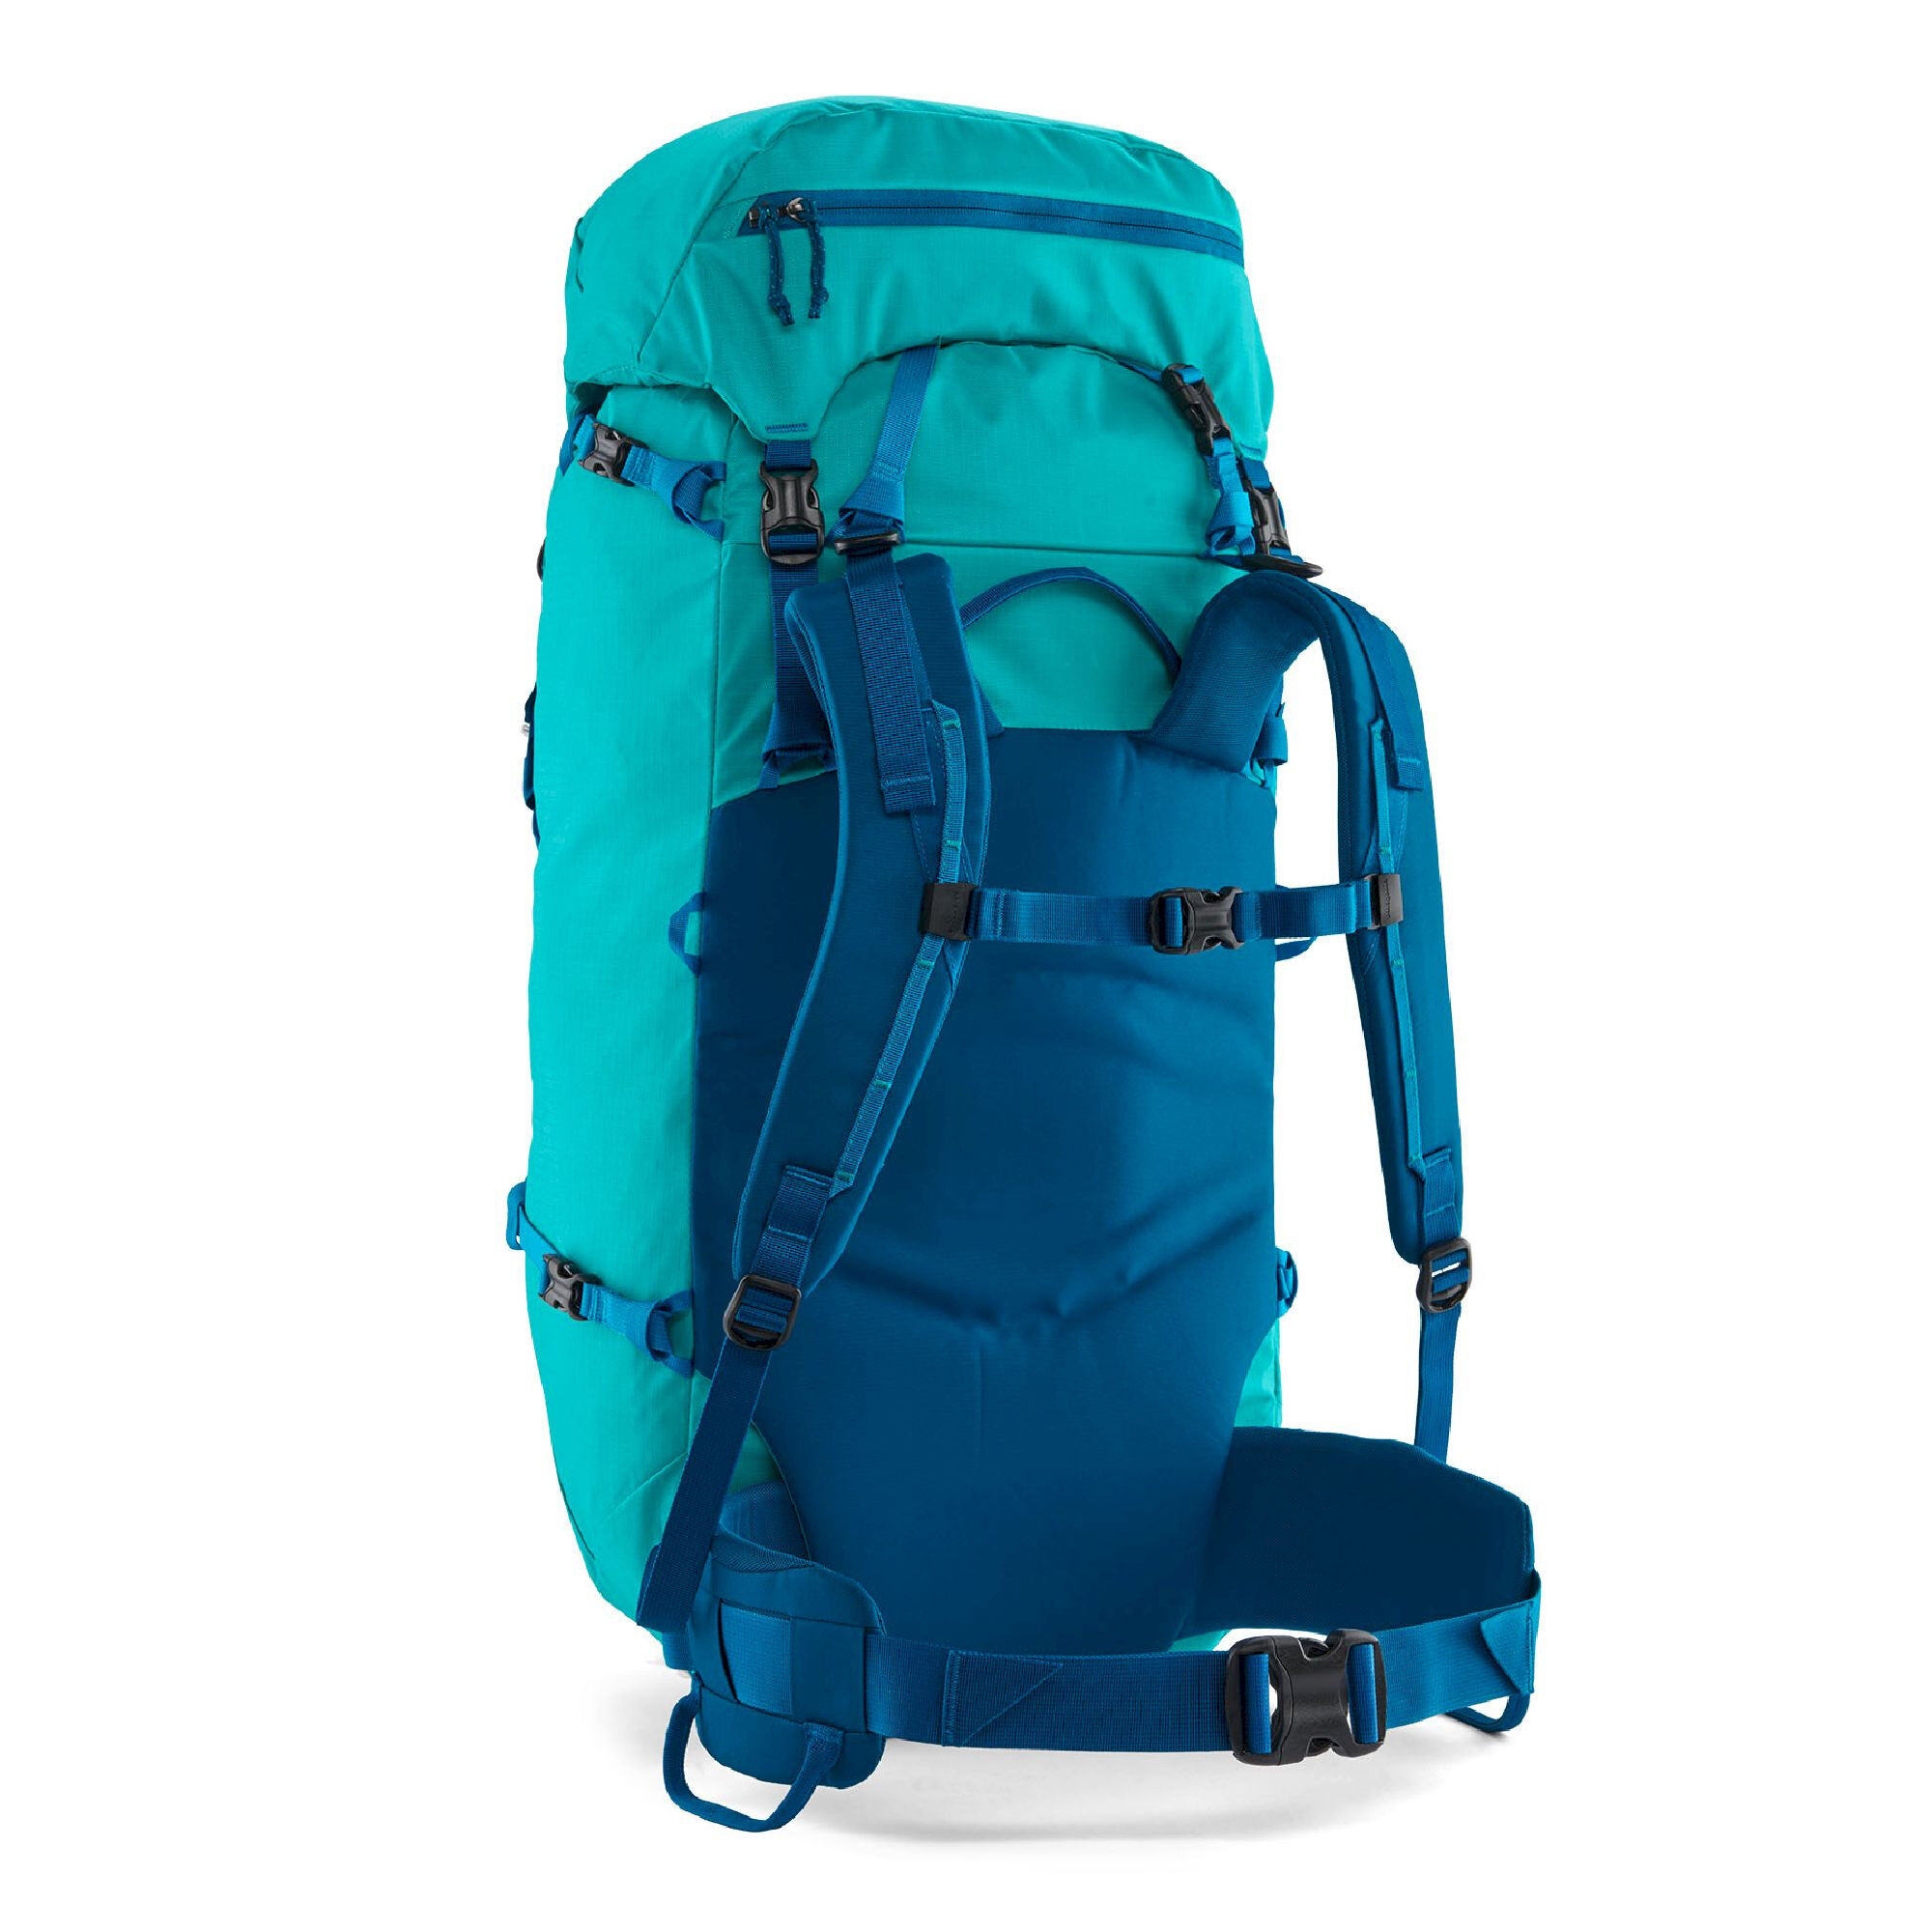 Patagonia Ascensionist 55L - Touring backpack